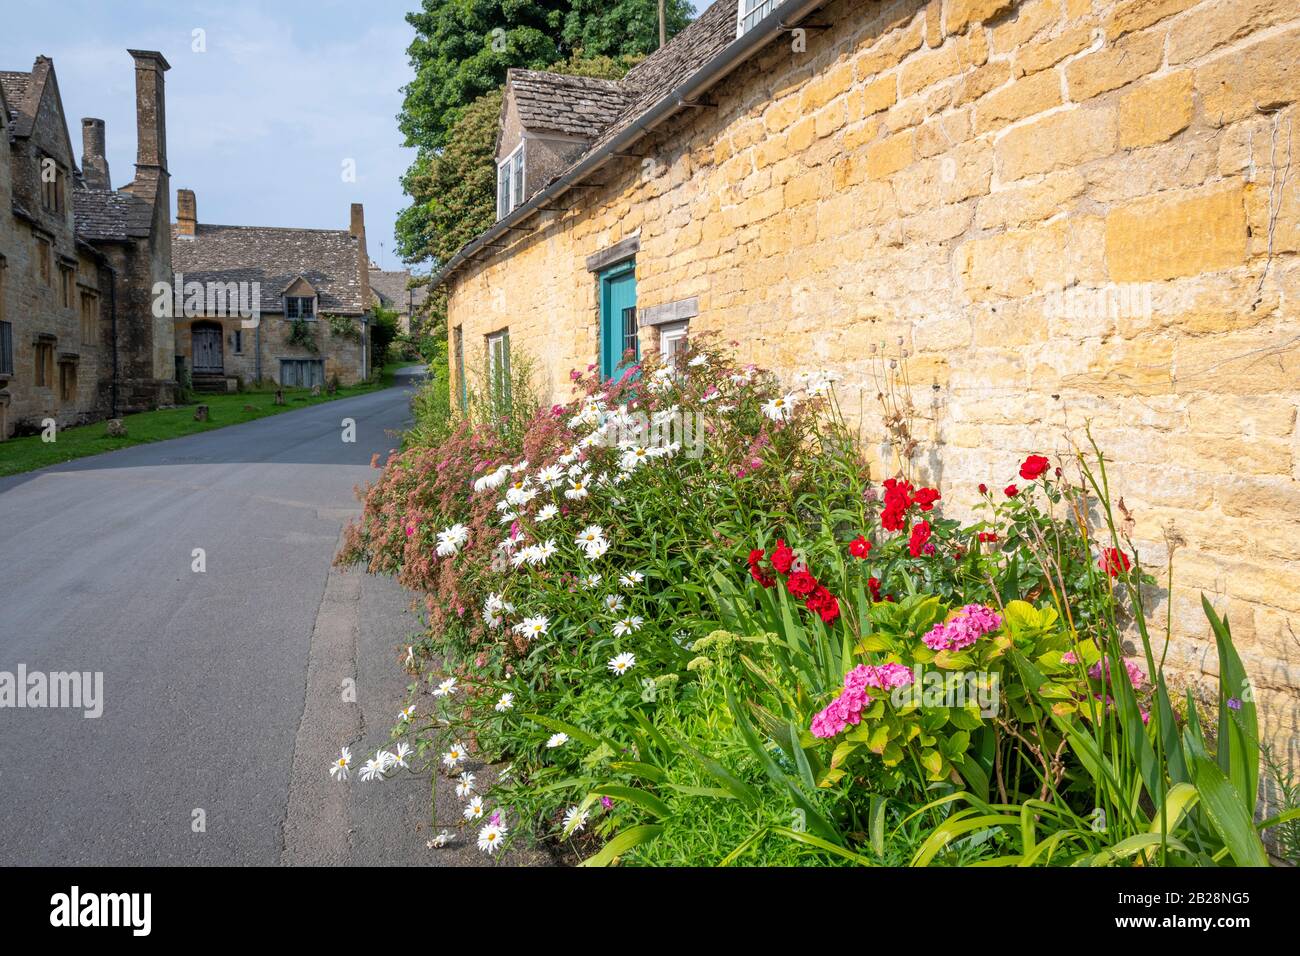 Flowers in front of houses in Cotswold village, Snowshill, Gloucestershire, Cotswolds, England Stock Photo